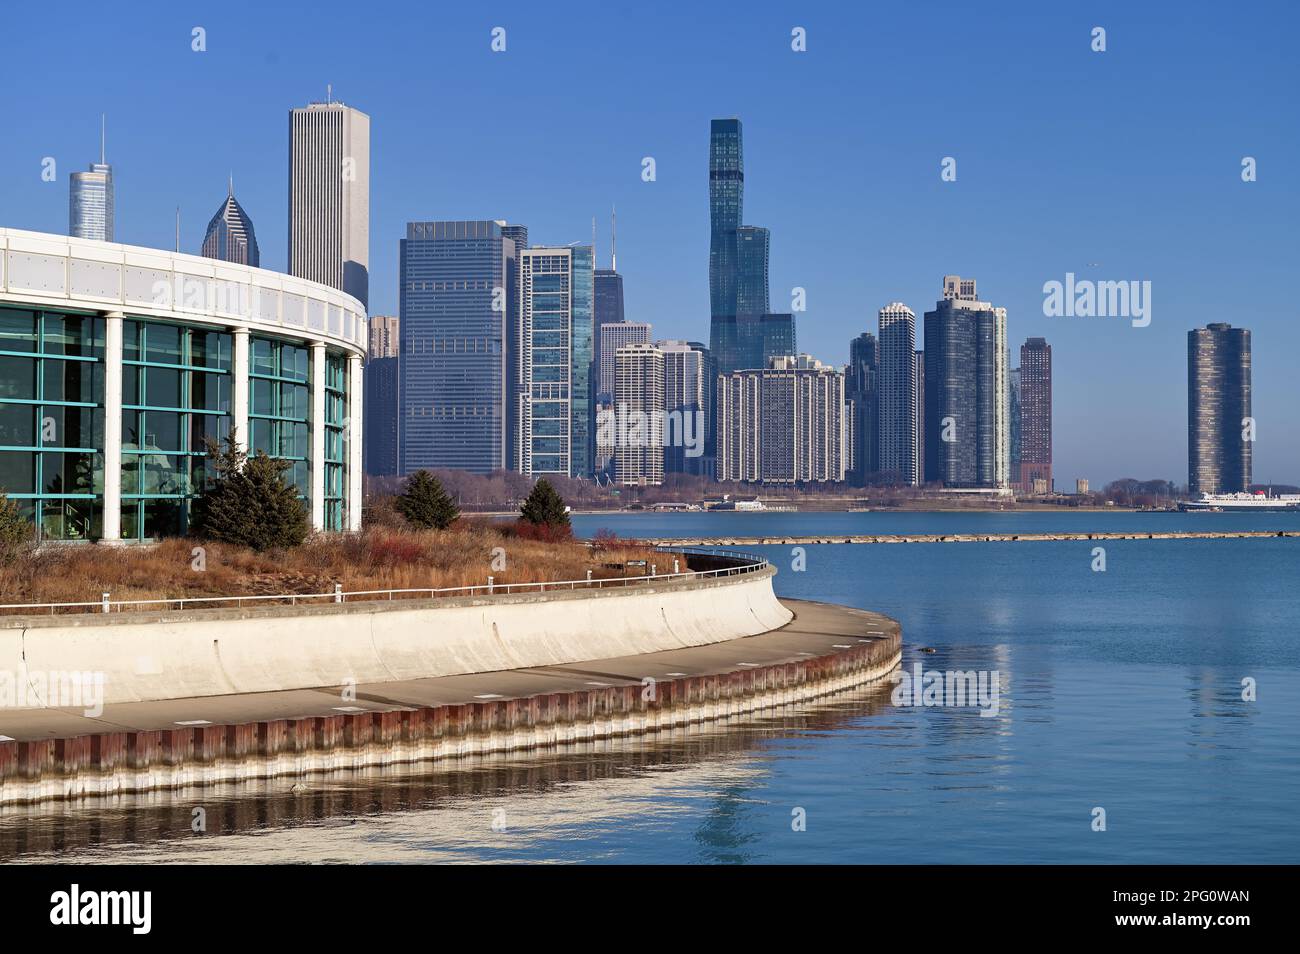 Chicago, Illinois, USA. The Shedd Aquarium, at left, (formally the John G. Shedd Aquarium) located south of the city's Loop on the Museum Campus. Stock Photo